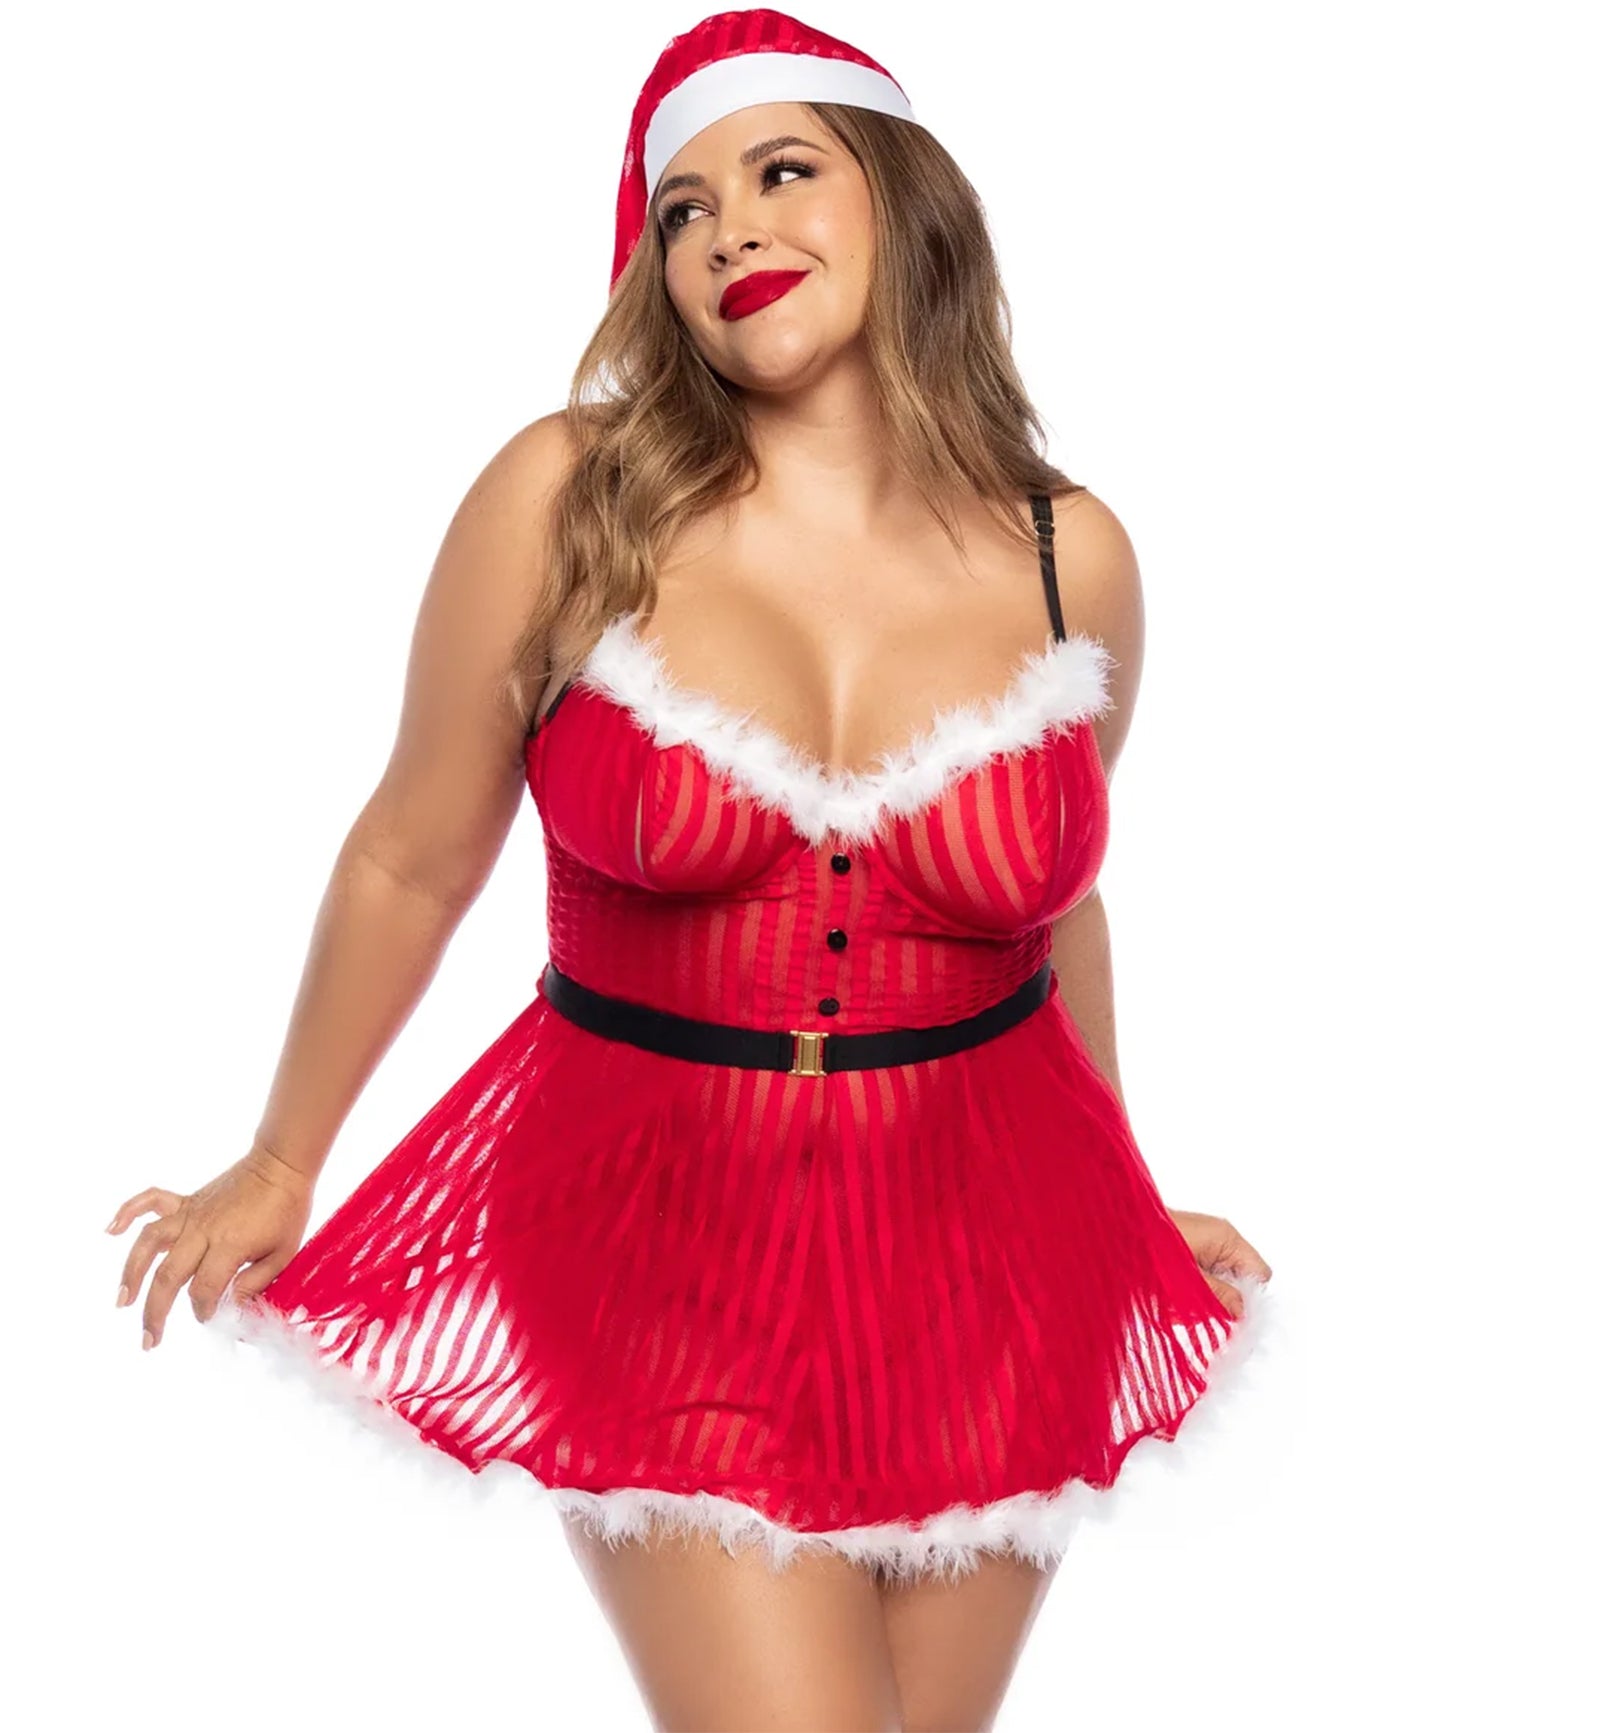 Mapale Mrs. Claus 2 Piece Set PLUS: Peek-a-Boo Dress and Hat (60010X),3X/4X,Red - Red,3X/4X